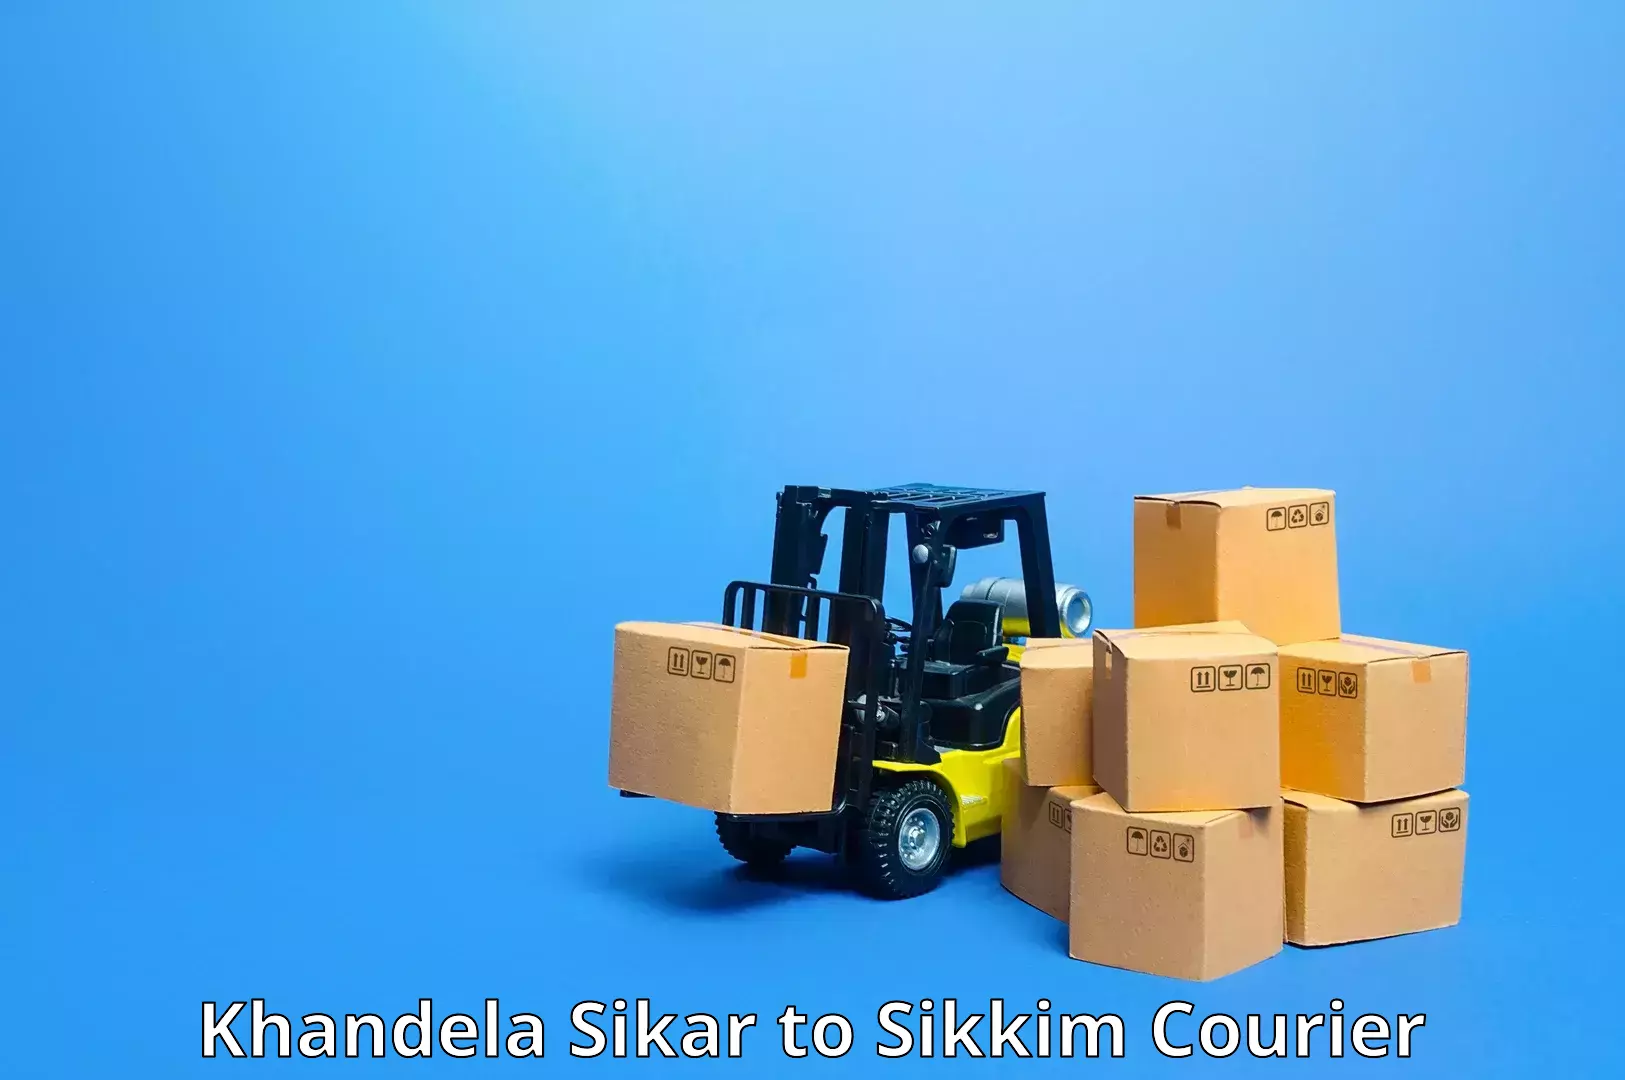 Easy access courier services Khandela Sikar to Sikkim